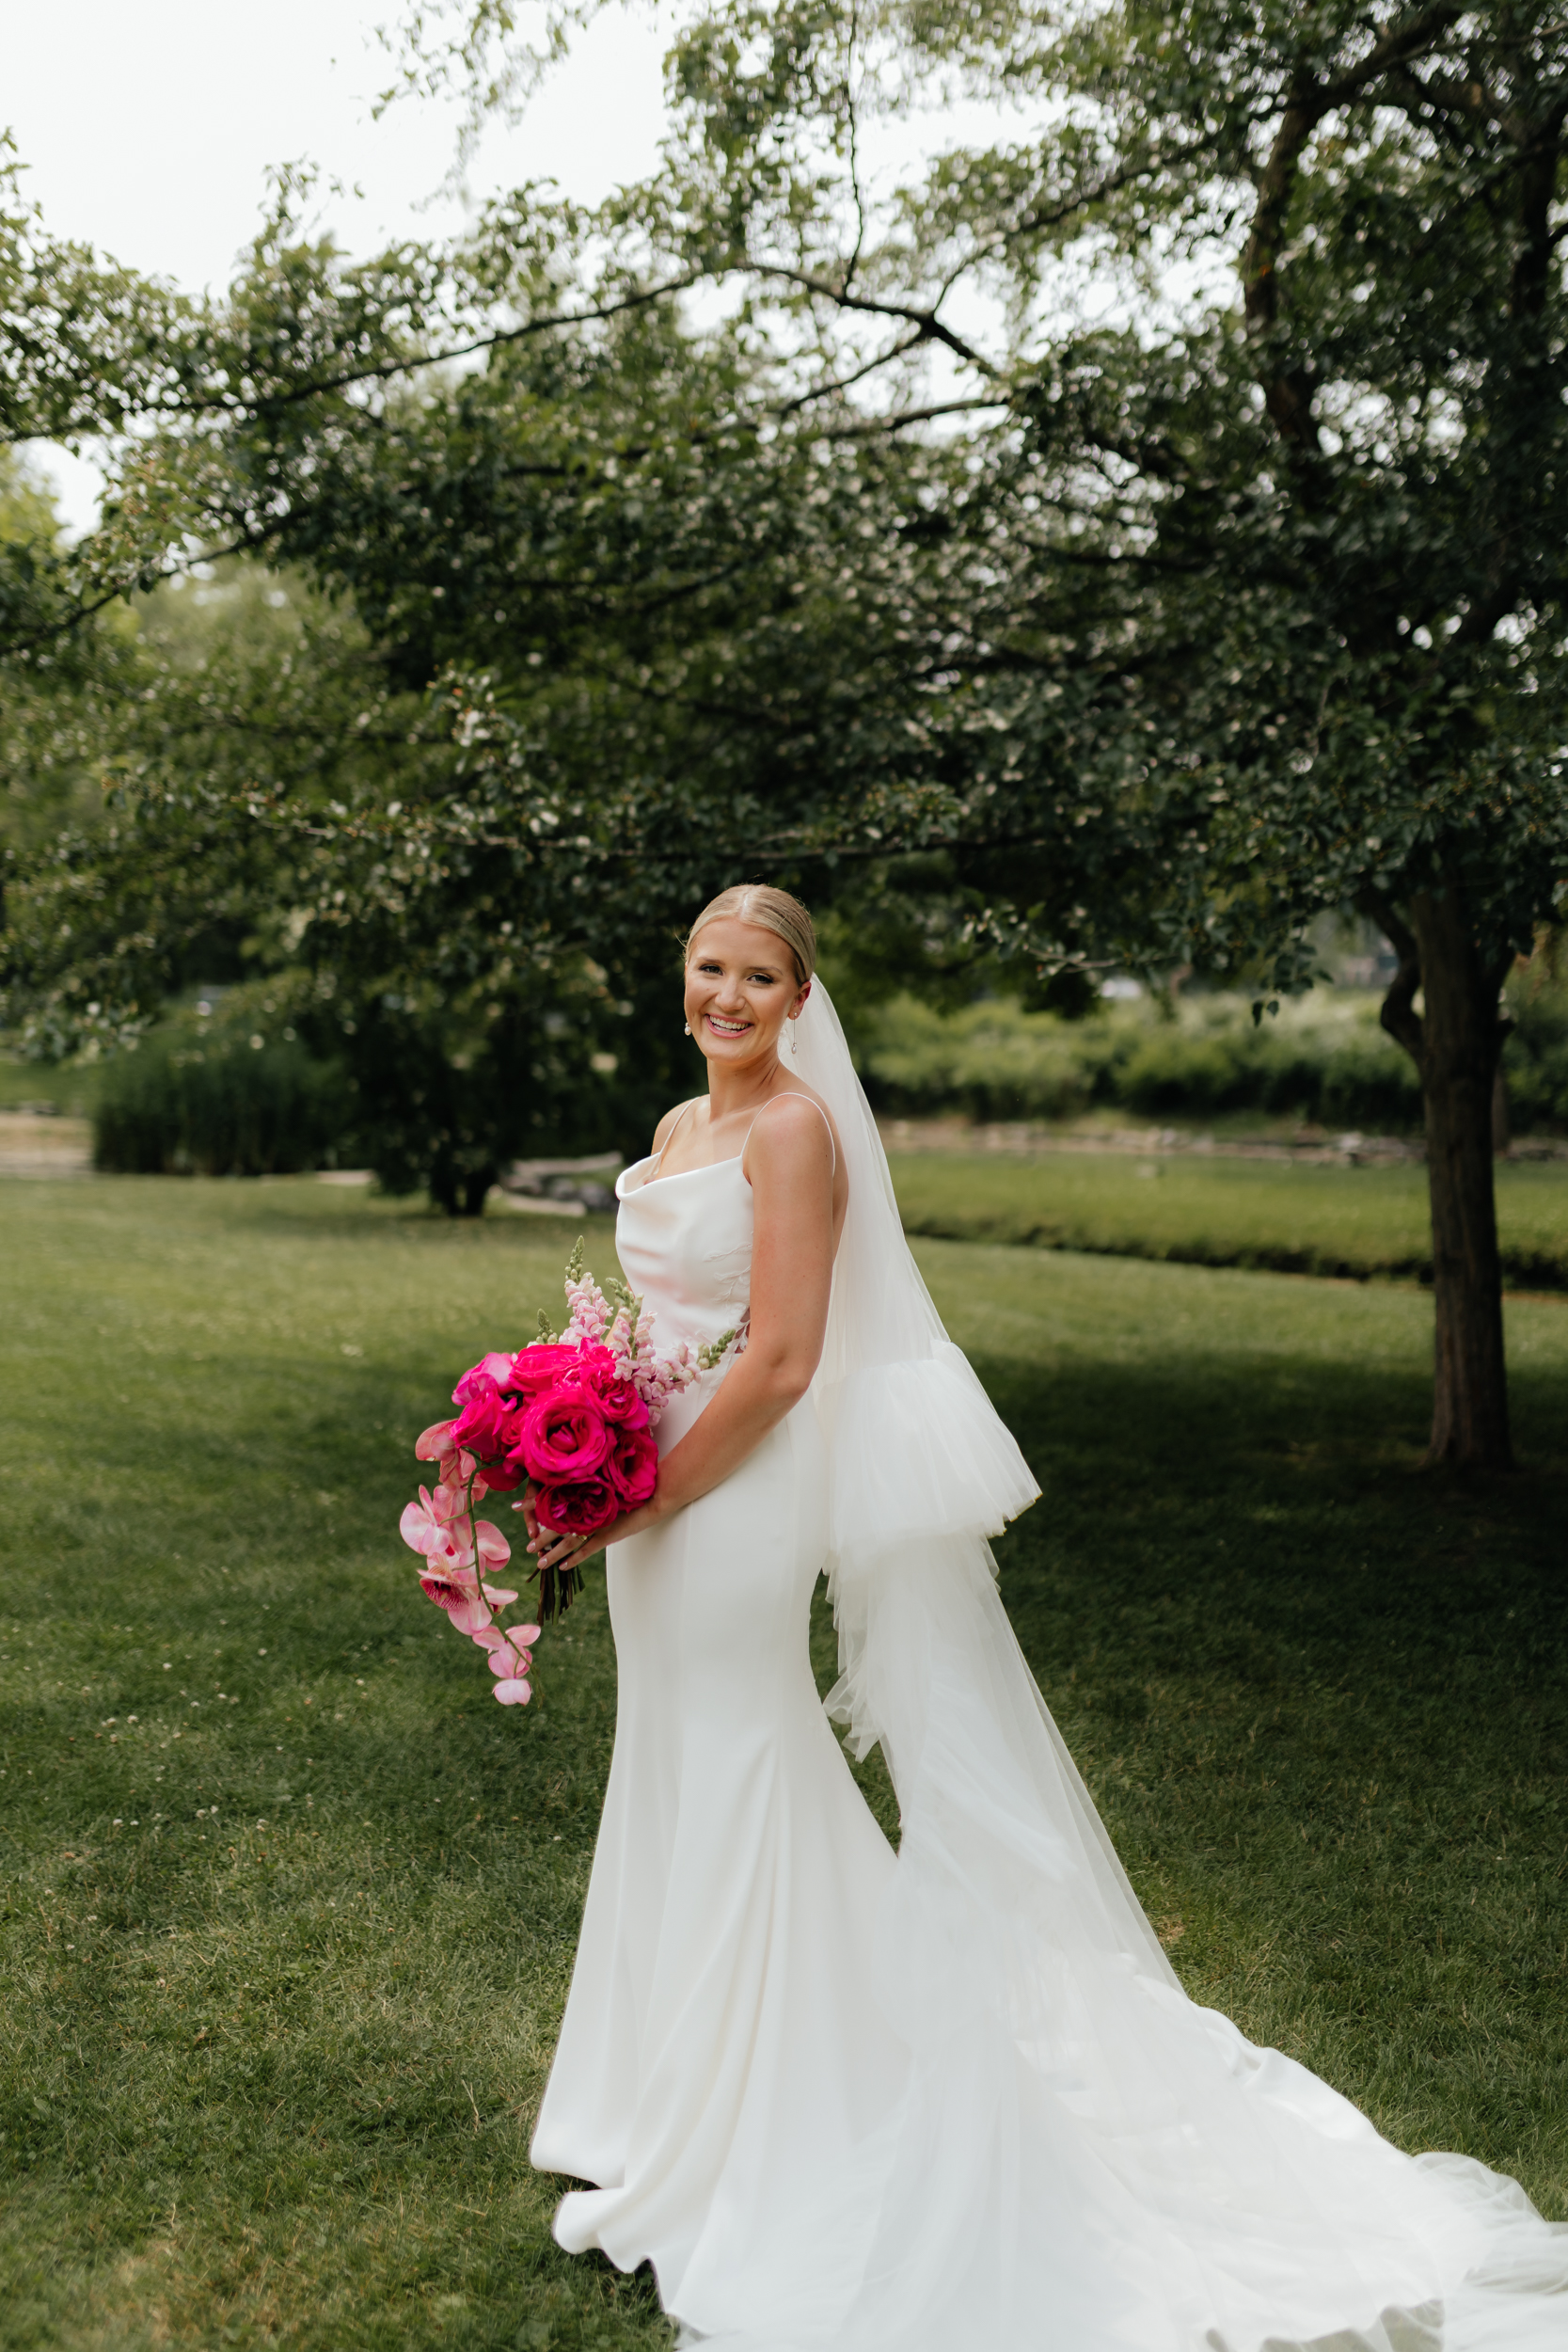 Portrait of an elegant bride and a pink bouquet on her wedding day